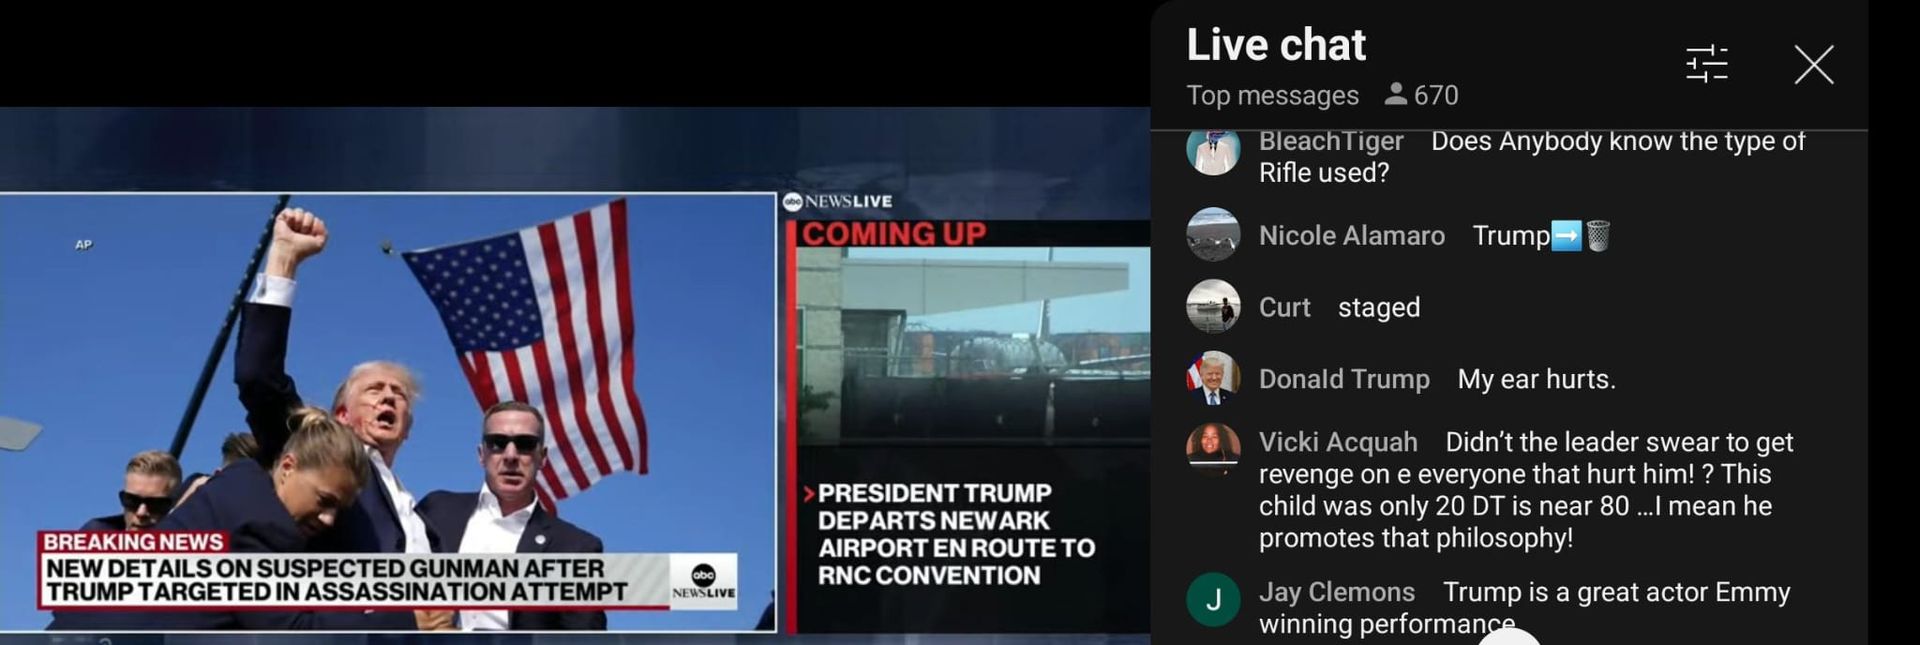 AP
BREAKING NEWS
NEWSLIVE
COMING UP
> PRESIDENT TRUMP
DEPARTS NEWARK
AIRPORT EN ROUTE TO
Live chat
Top messages
670
☑
BleachTiger Does Anybody know the type of
Rifle used?
Nicole Alamaro Trump
Curt staged
Donald Trump My ear hurts.
Vicki Acquah Didn't the leader swear to get
revenge on e everyone that hurt him!? This
child was only 20 DT is near 80...I mean he
promotes that philosophy!
JJay Clemons Trump is a great actor Emmy
winning performance
NEW DETAILS ON SUSPECTED GUNMAN AFTER
TRUMP TARGETED IN ASSASSINATION ATTEMPT
abc
NEWSLIVE
RNC CONVENTION